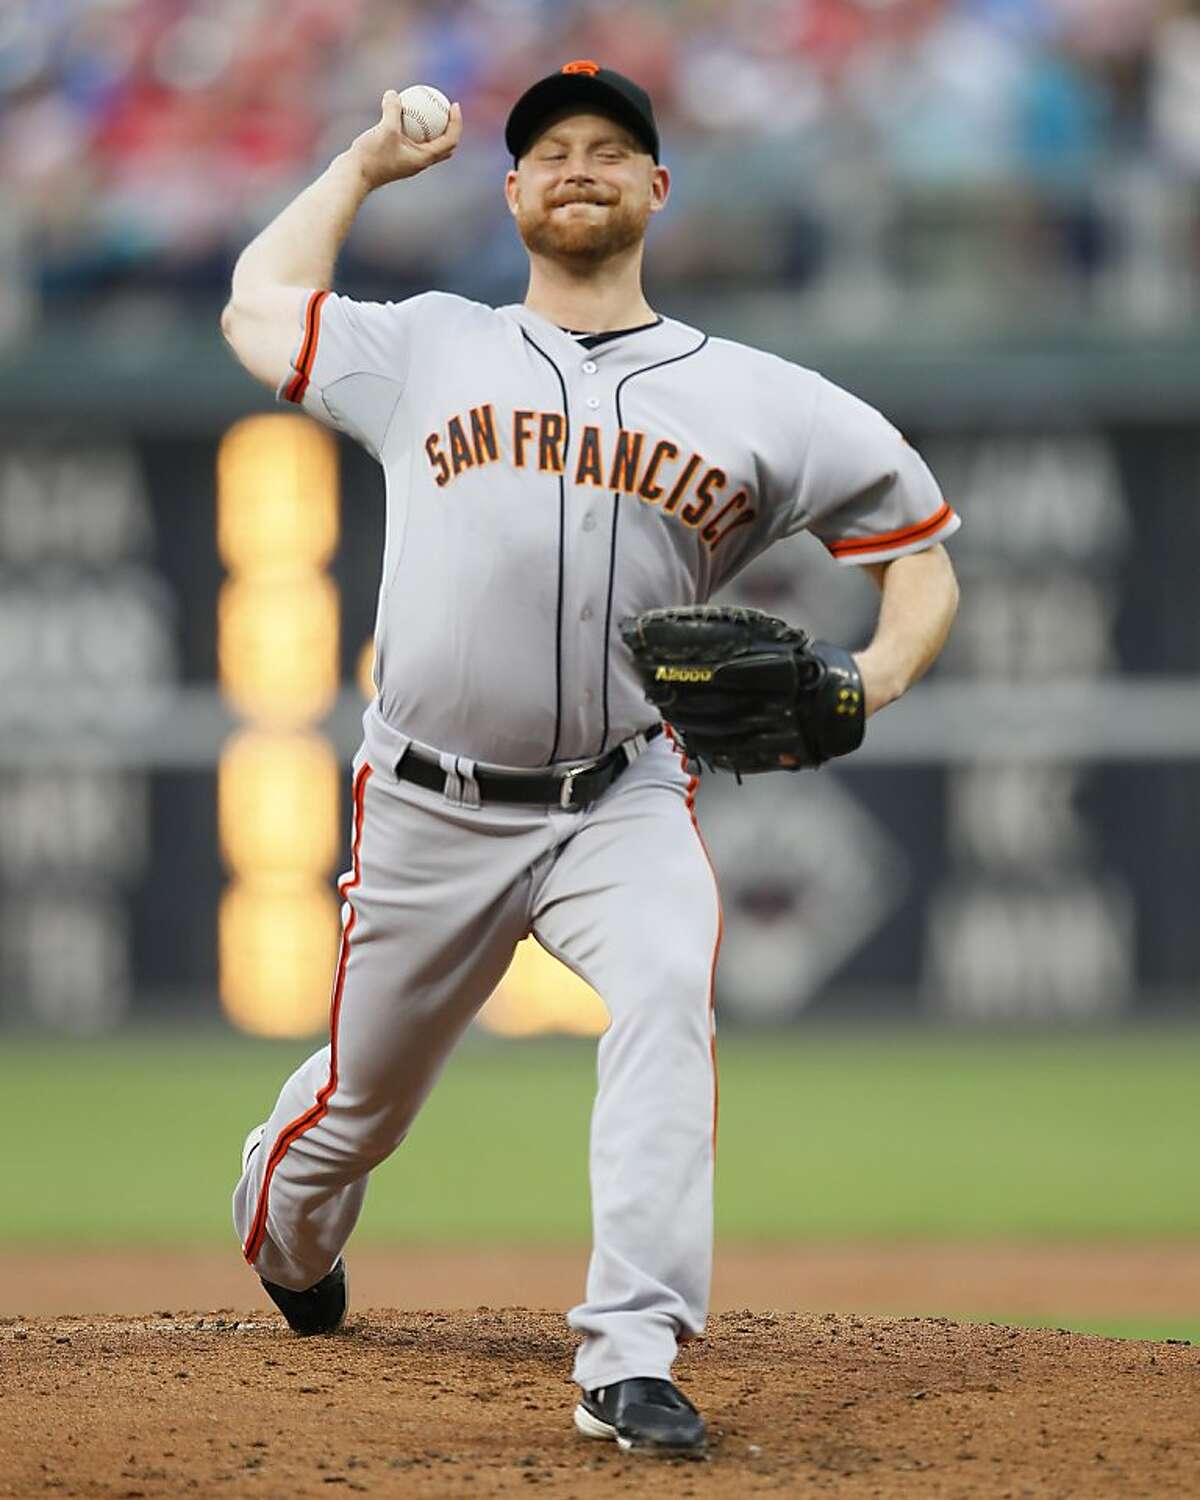 San Francisco Giants' Chad Gaudin during a baseball game with the Philadelphia Phillies, Tuesday, July 30, 2013, in Philadelphia. (AP Photo/Tom Mihalek)